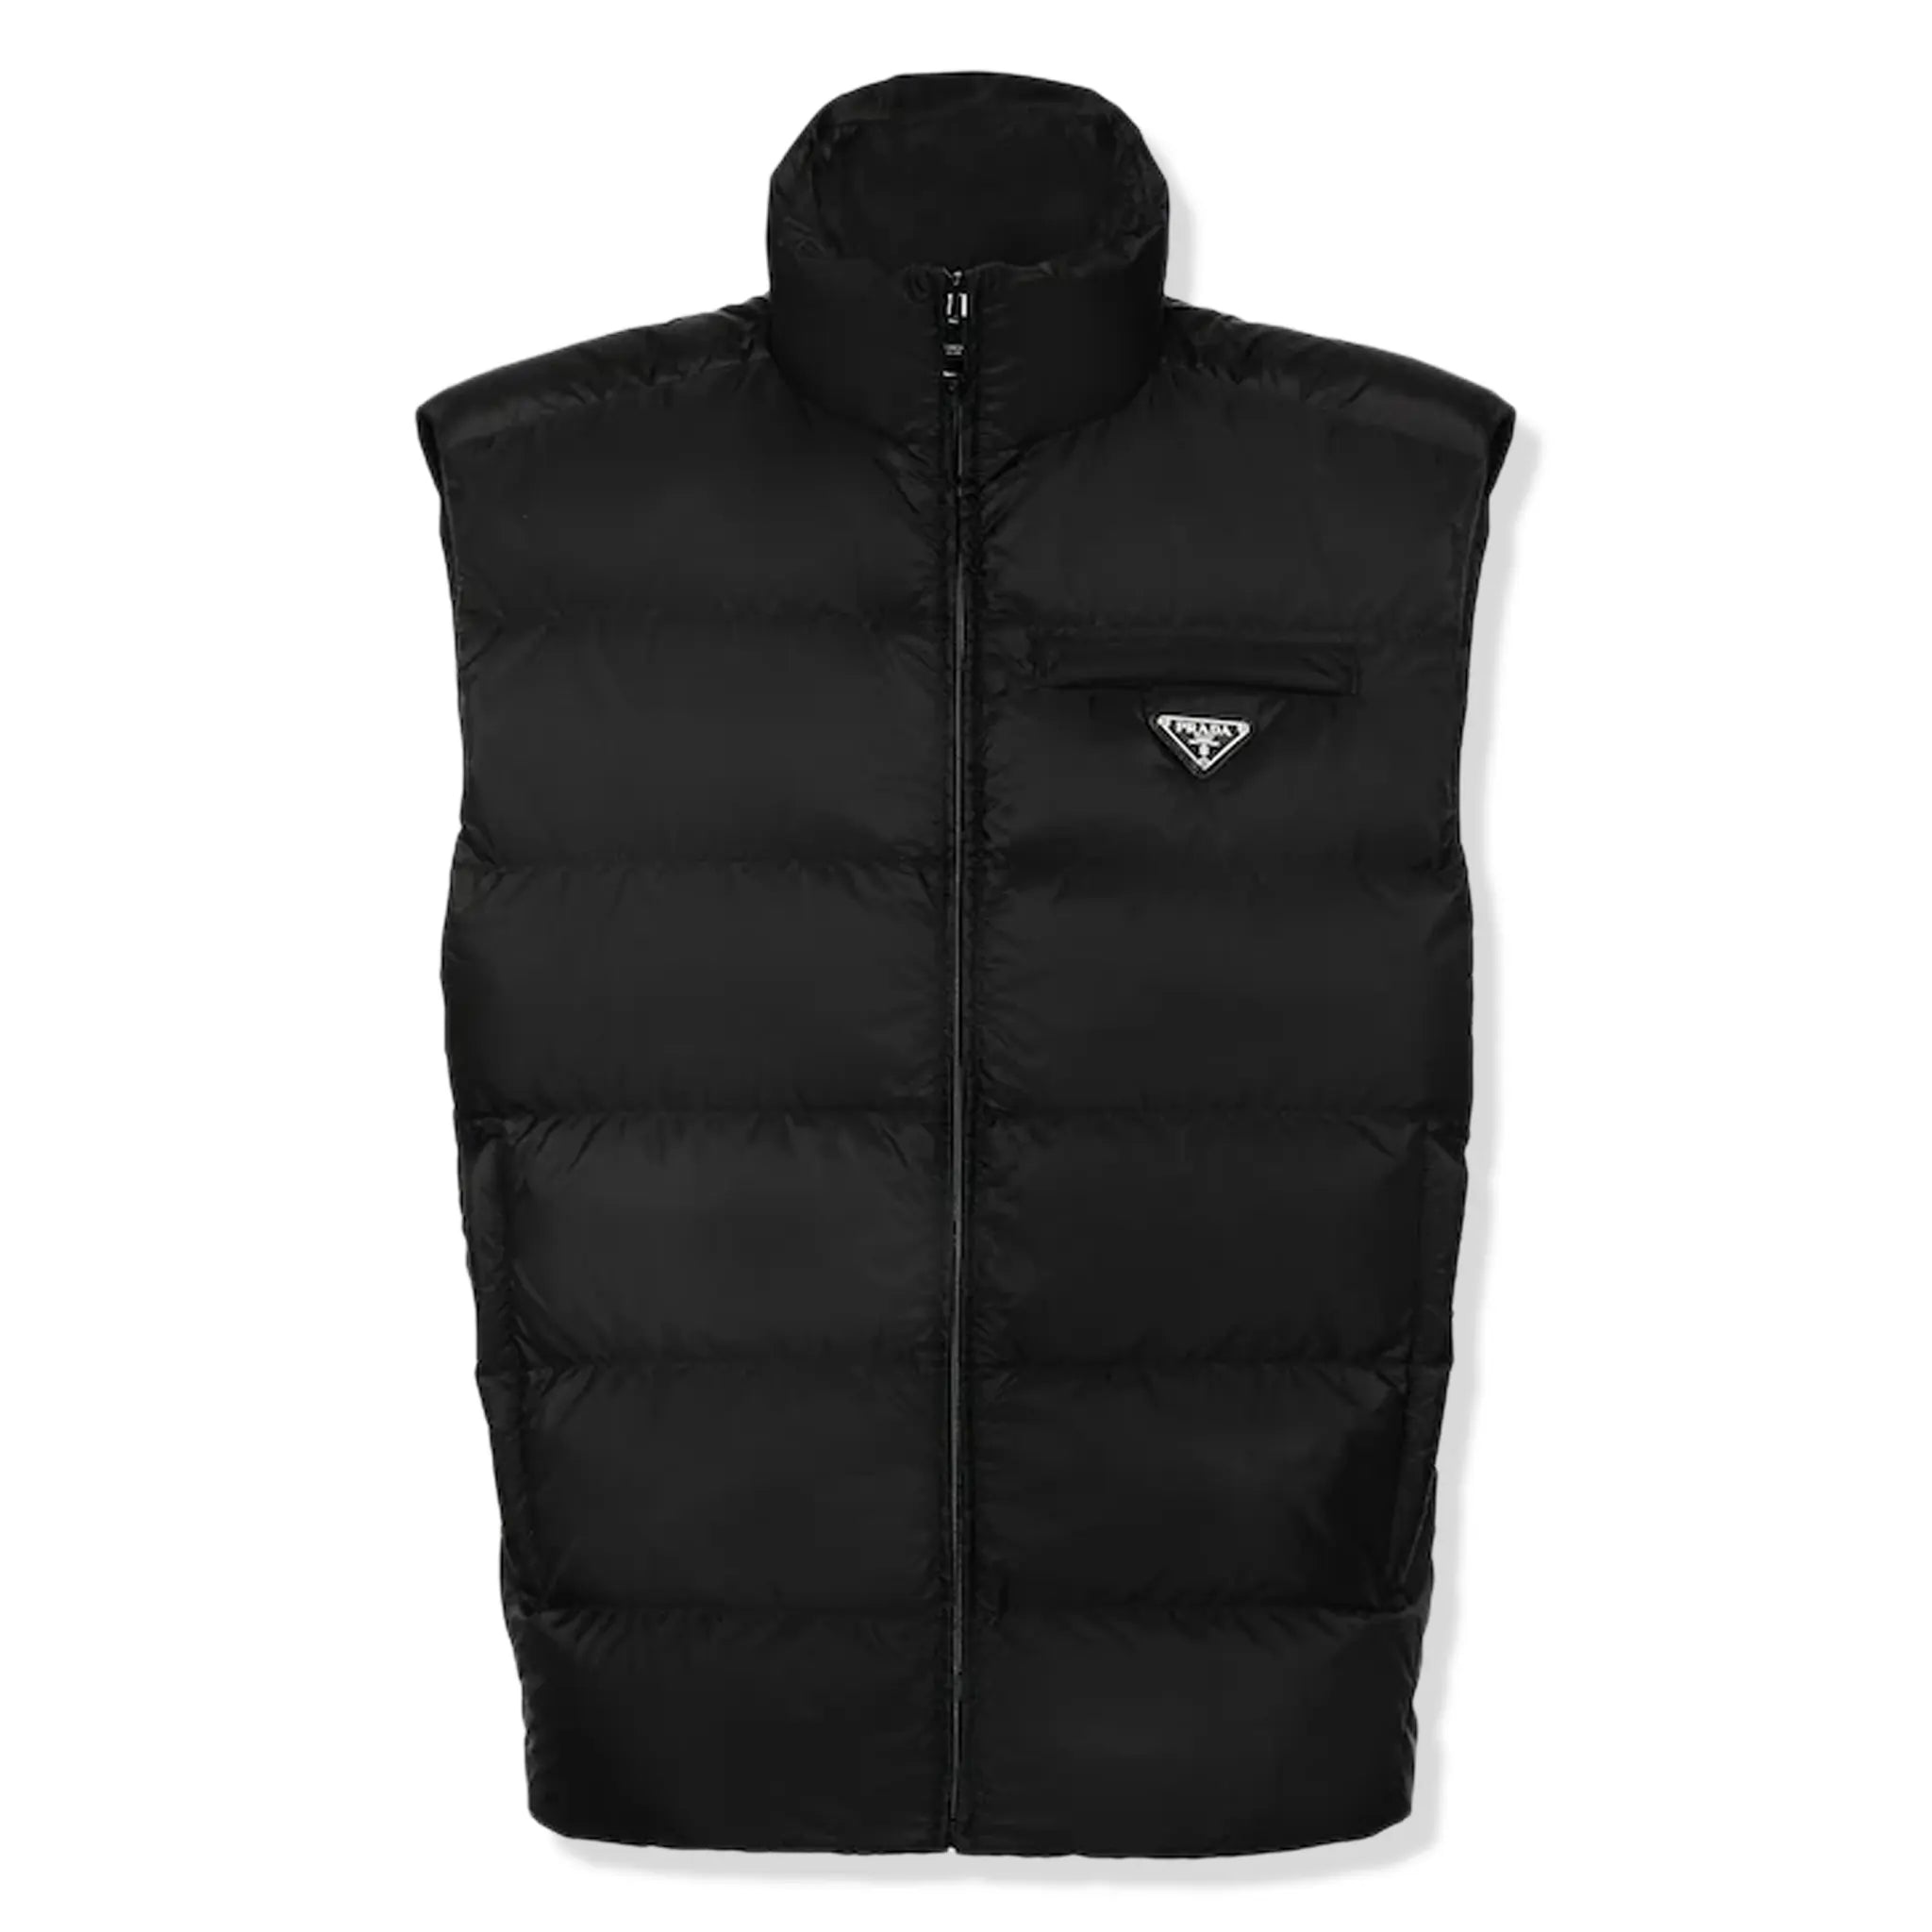 Front view of bryshed prada Padded Re Nylon Black Vest SGB033_1WQ9_F0002_S_191